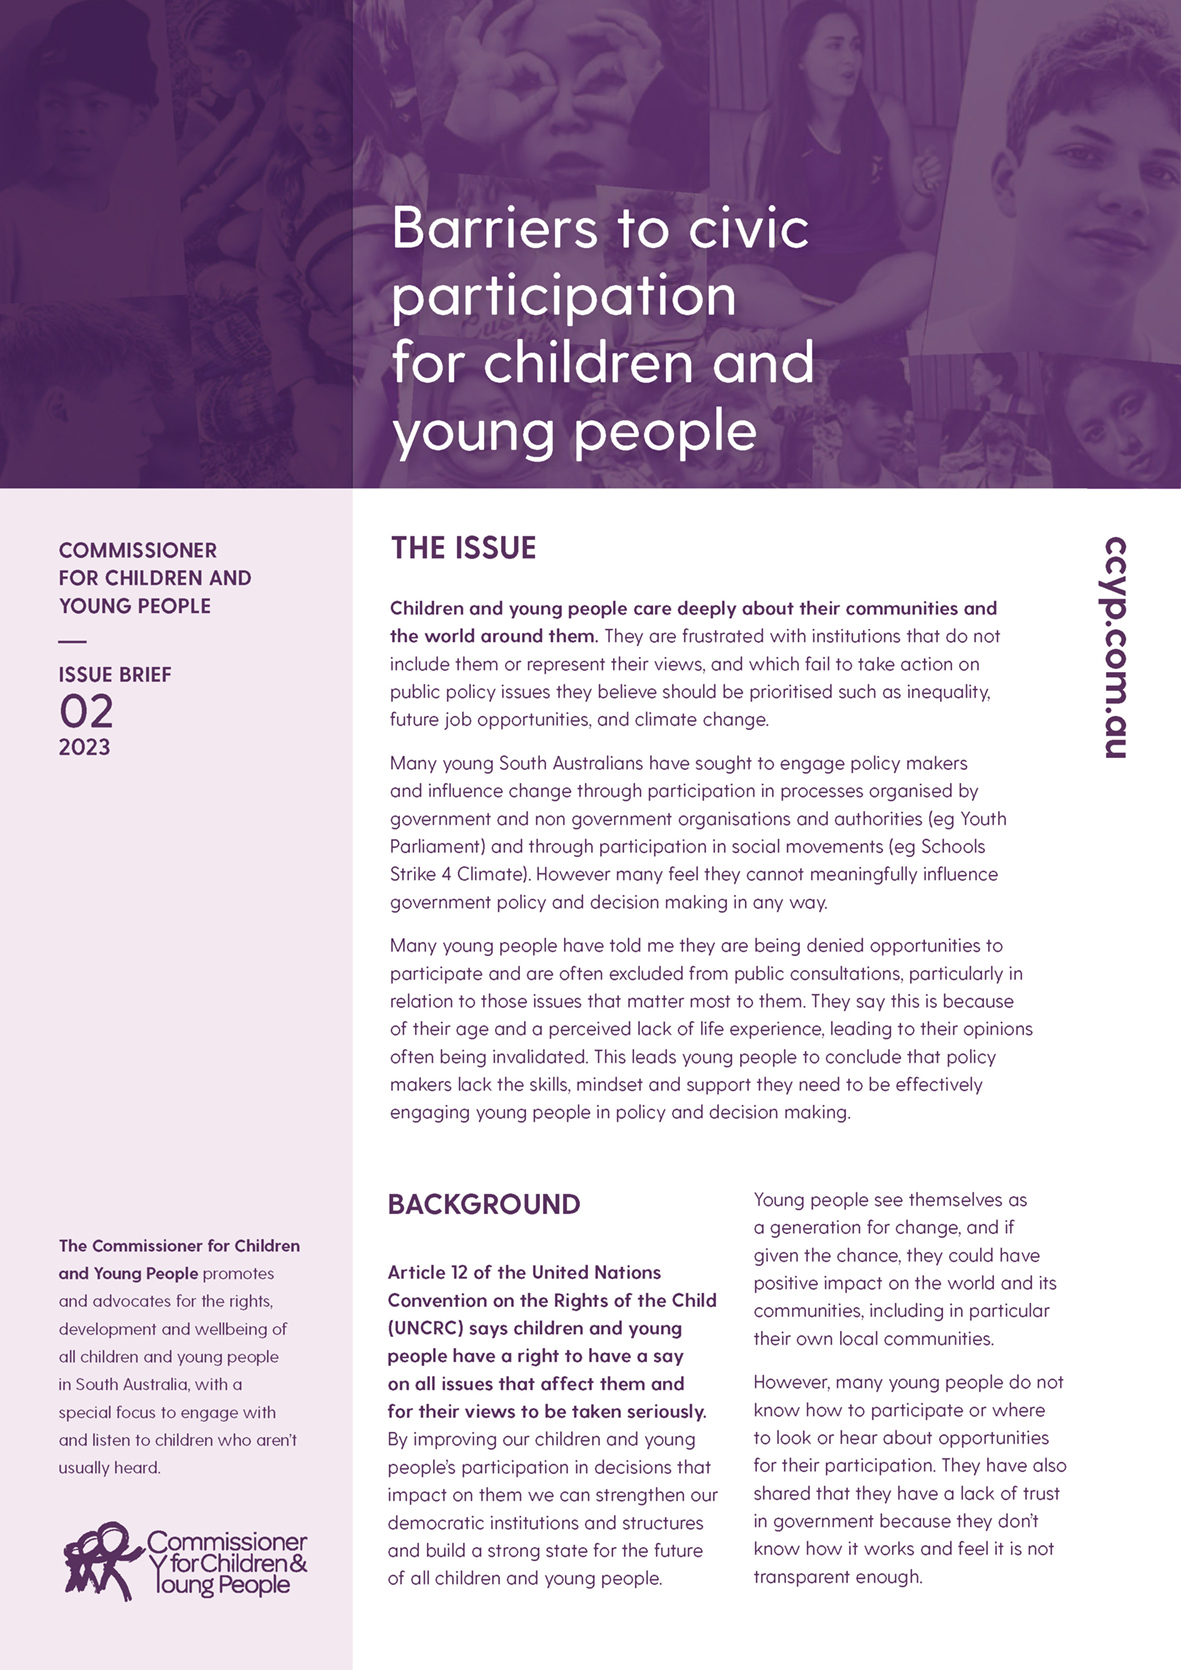 Annual Report to Children and Young People 2020-2021